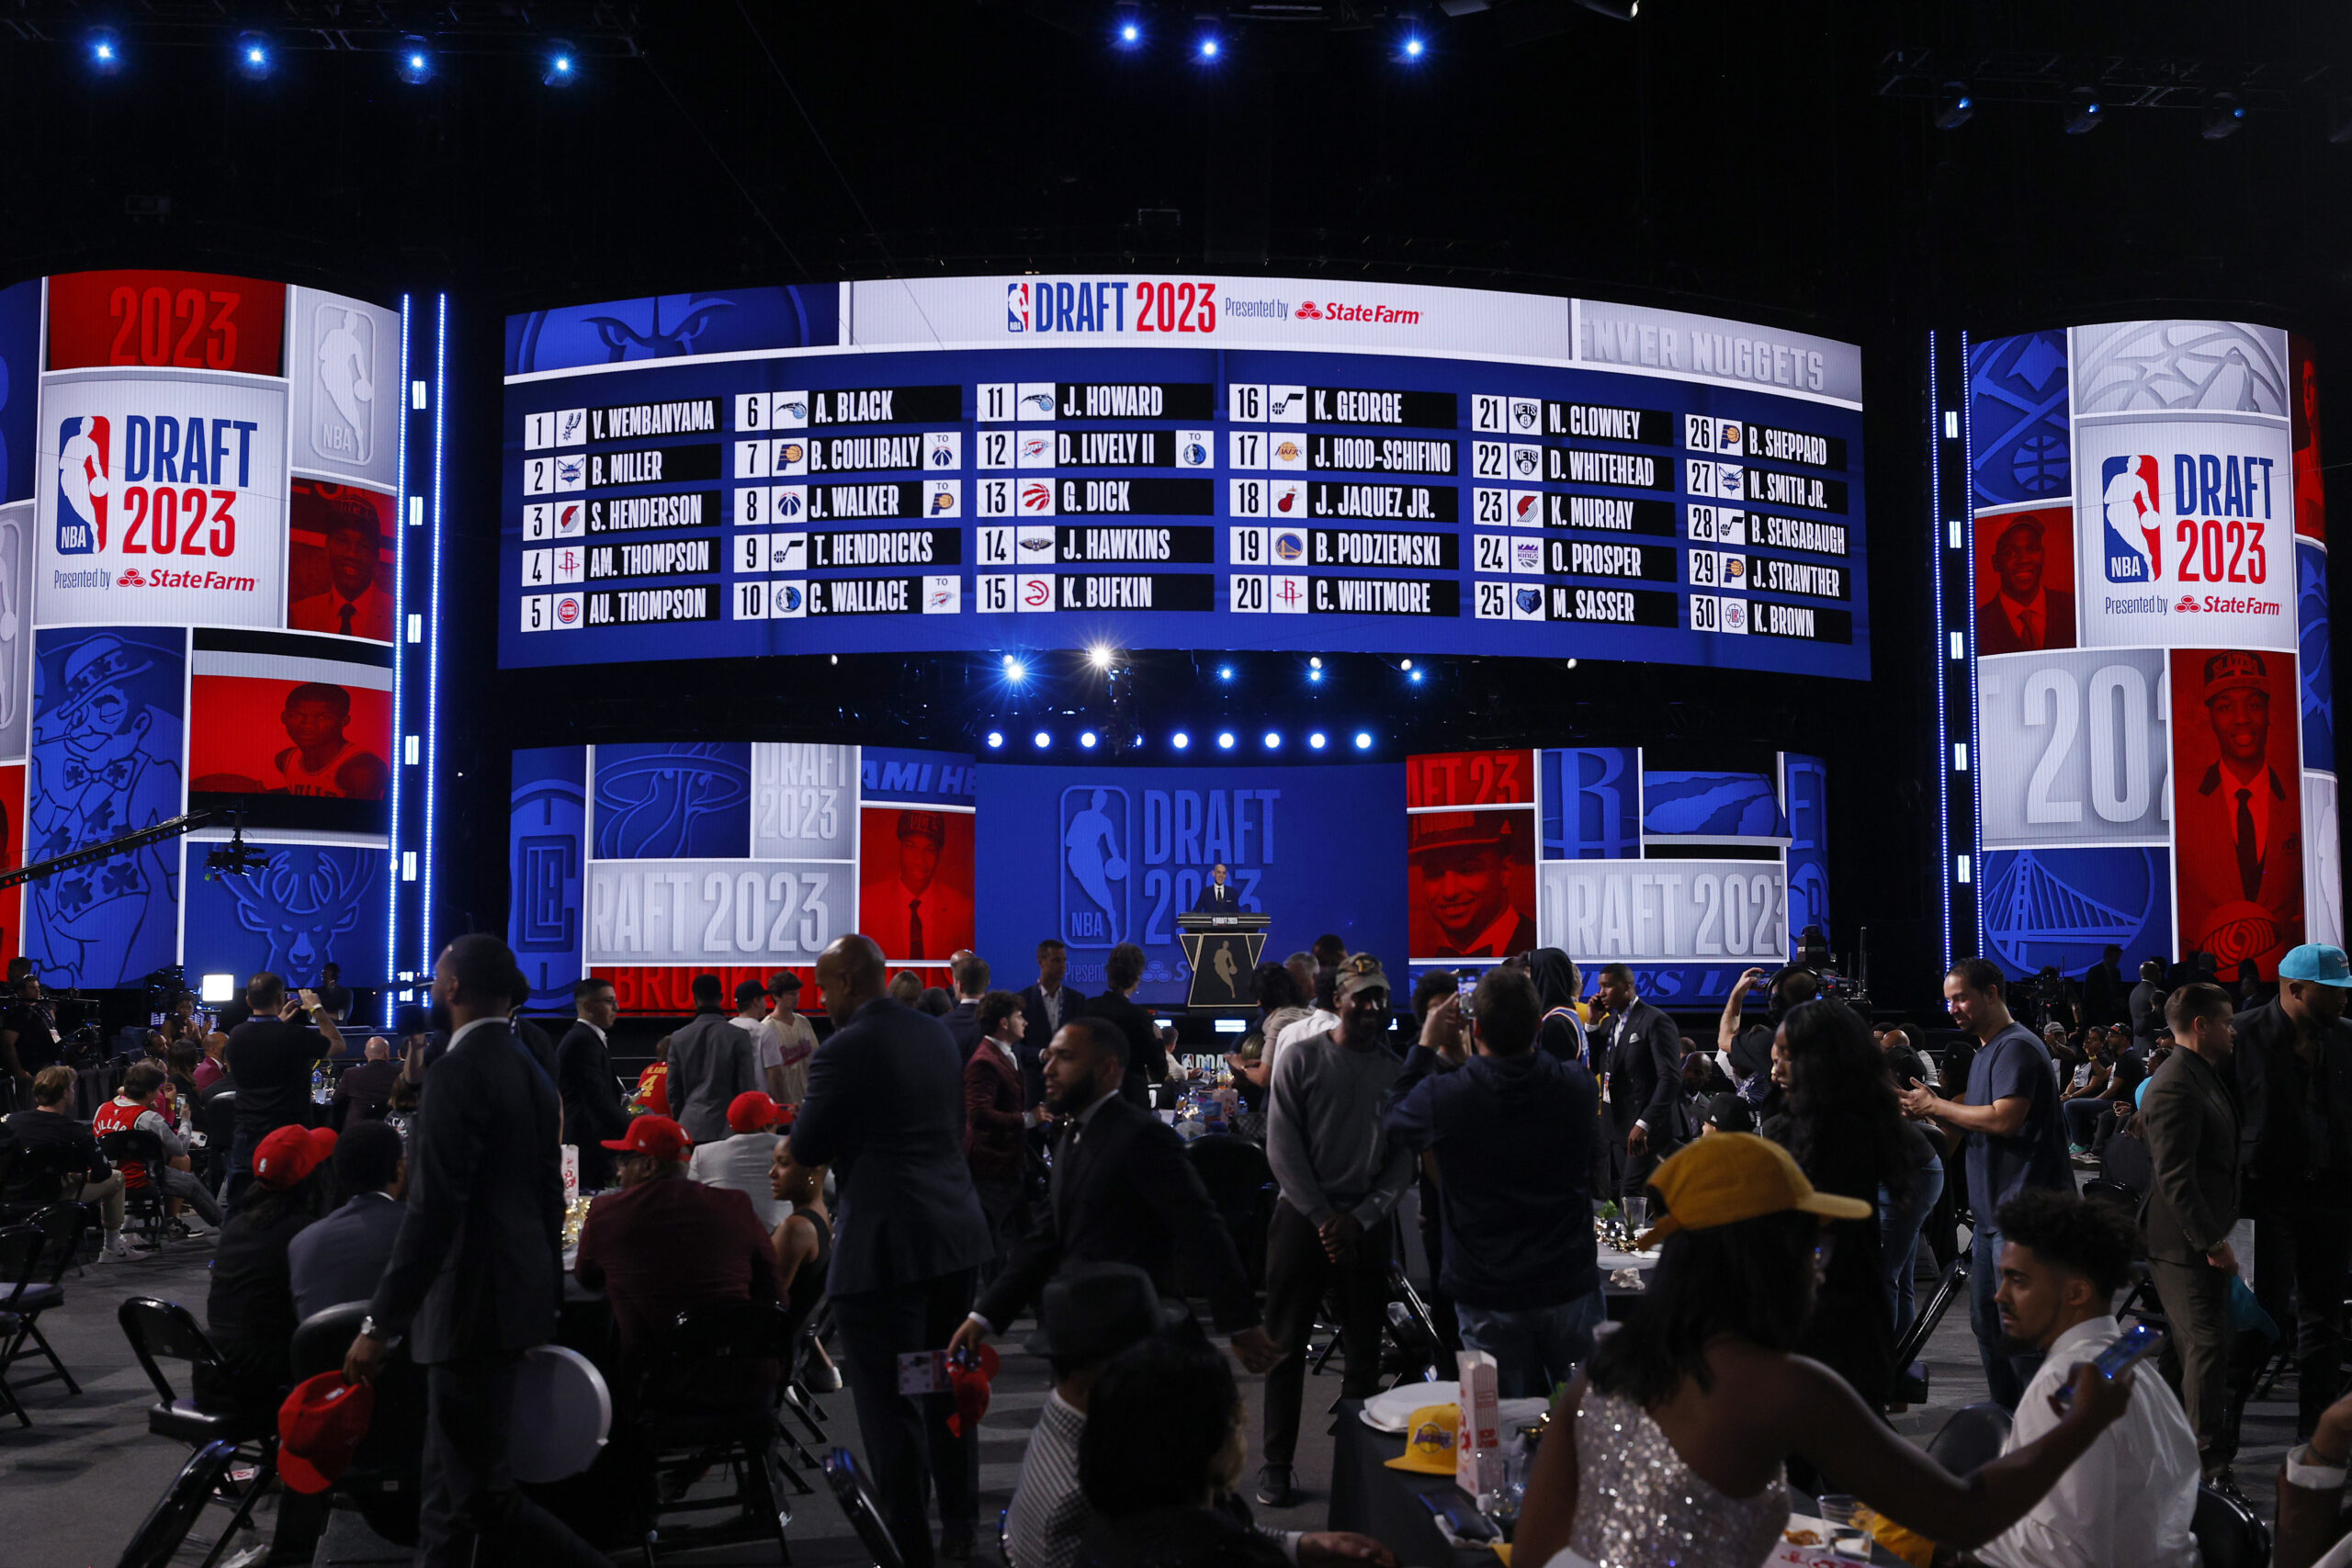 NEW YORK, NEW YORK - JUNE 22: A general view of the stage is seen as NBA commissioner Adam Silver closes out the first round of the 2023 NBA Draft at Barclays Center on June 22, 2023 in the Brooklyn borough of New York City. NOTE TO USER: User expressly acknowledges and agrees that, by downloading and or using this photograph, User is consenting to the terms and conditions of the Getty Images License Agreement. (Photo by Sarah Stier/Getty Images)